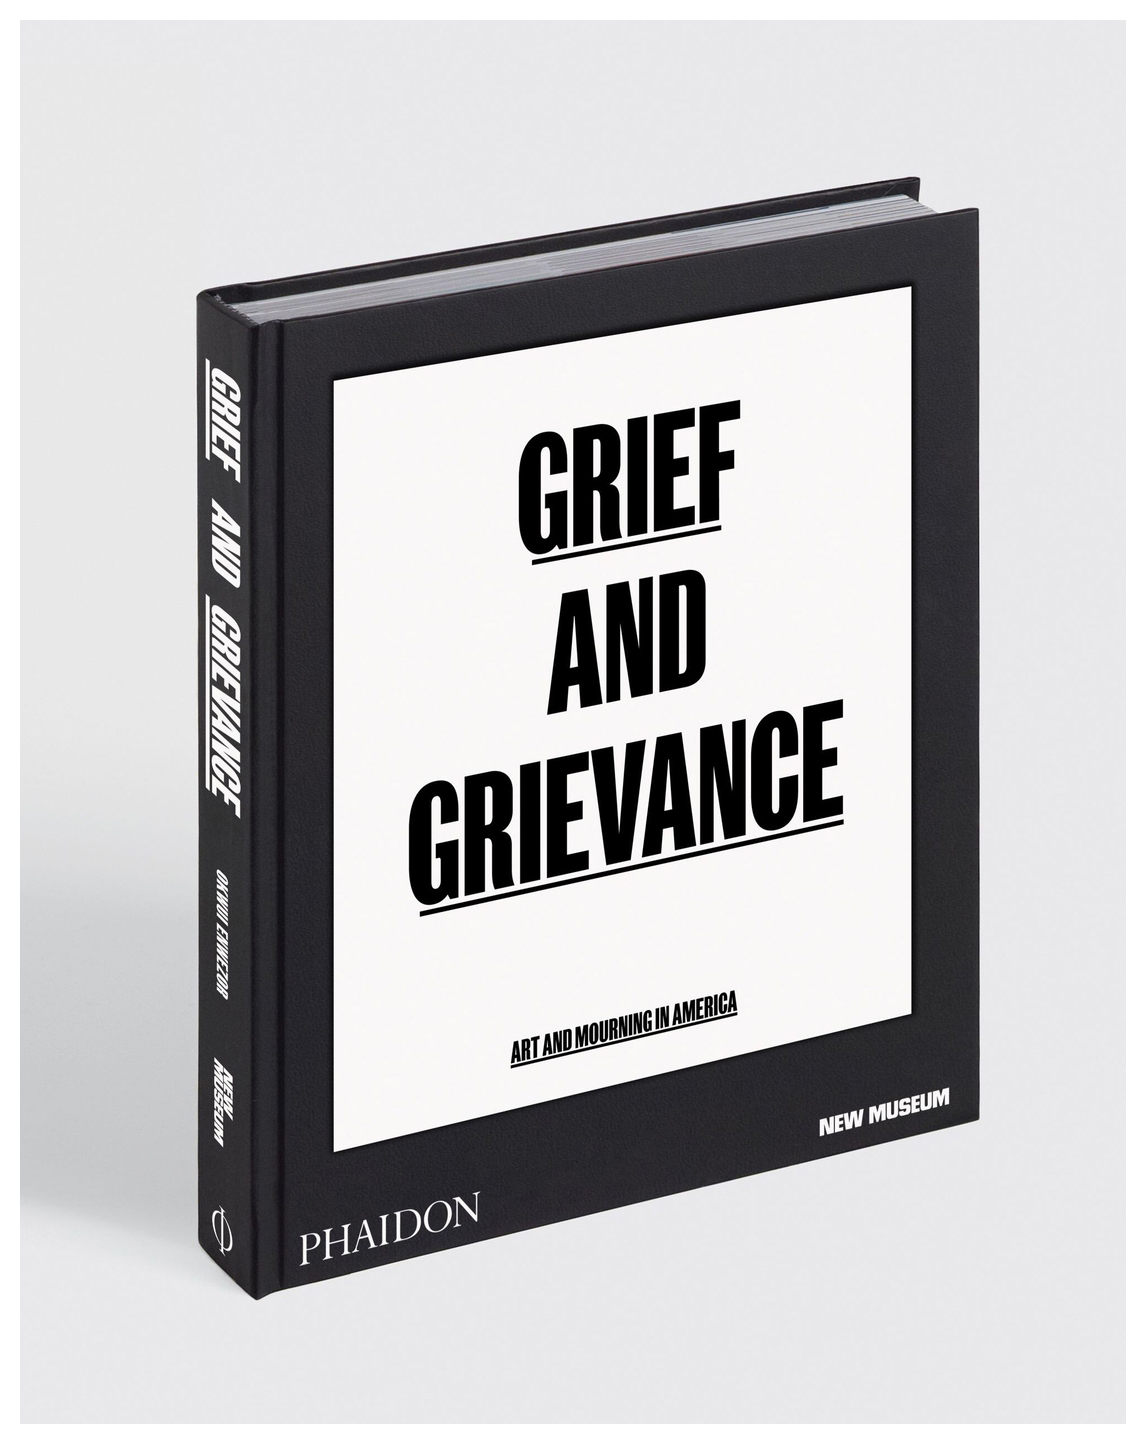 Grief and Grievance: Art and Mourning in America (New Museum) selected writings